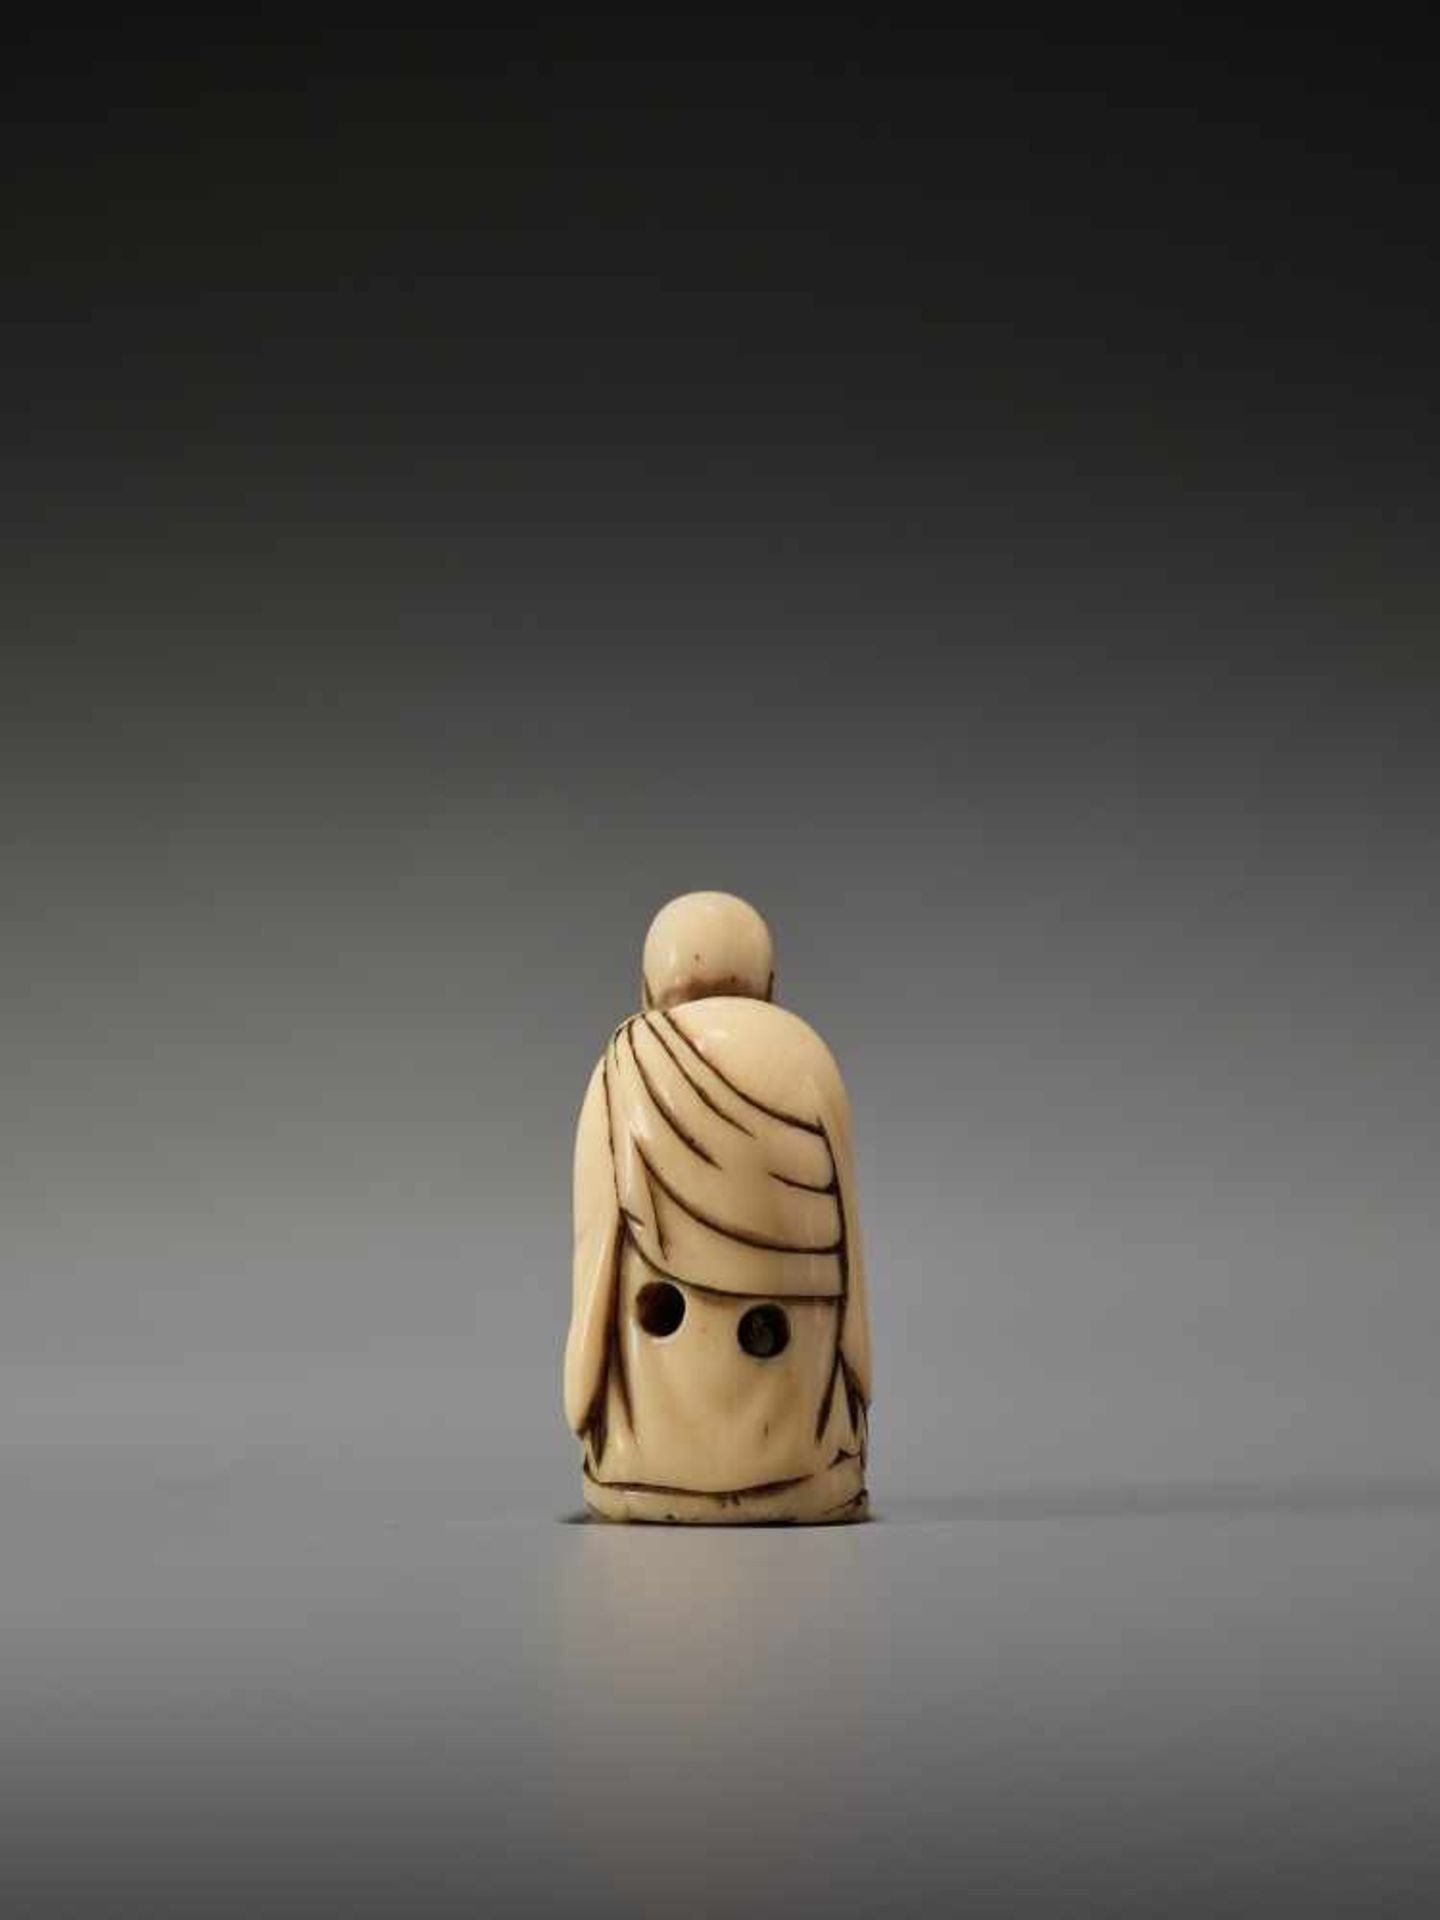 AN IVORY NETSUKE OF A MONK AND REPENTANT ONIUnsigned, Tomochika school, ivory netsukeJapan, mid to - Image 5 of 7